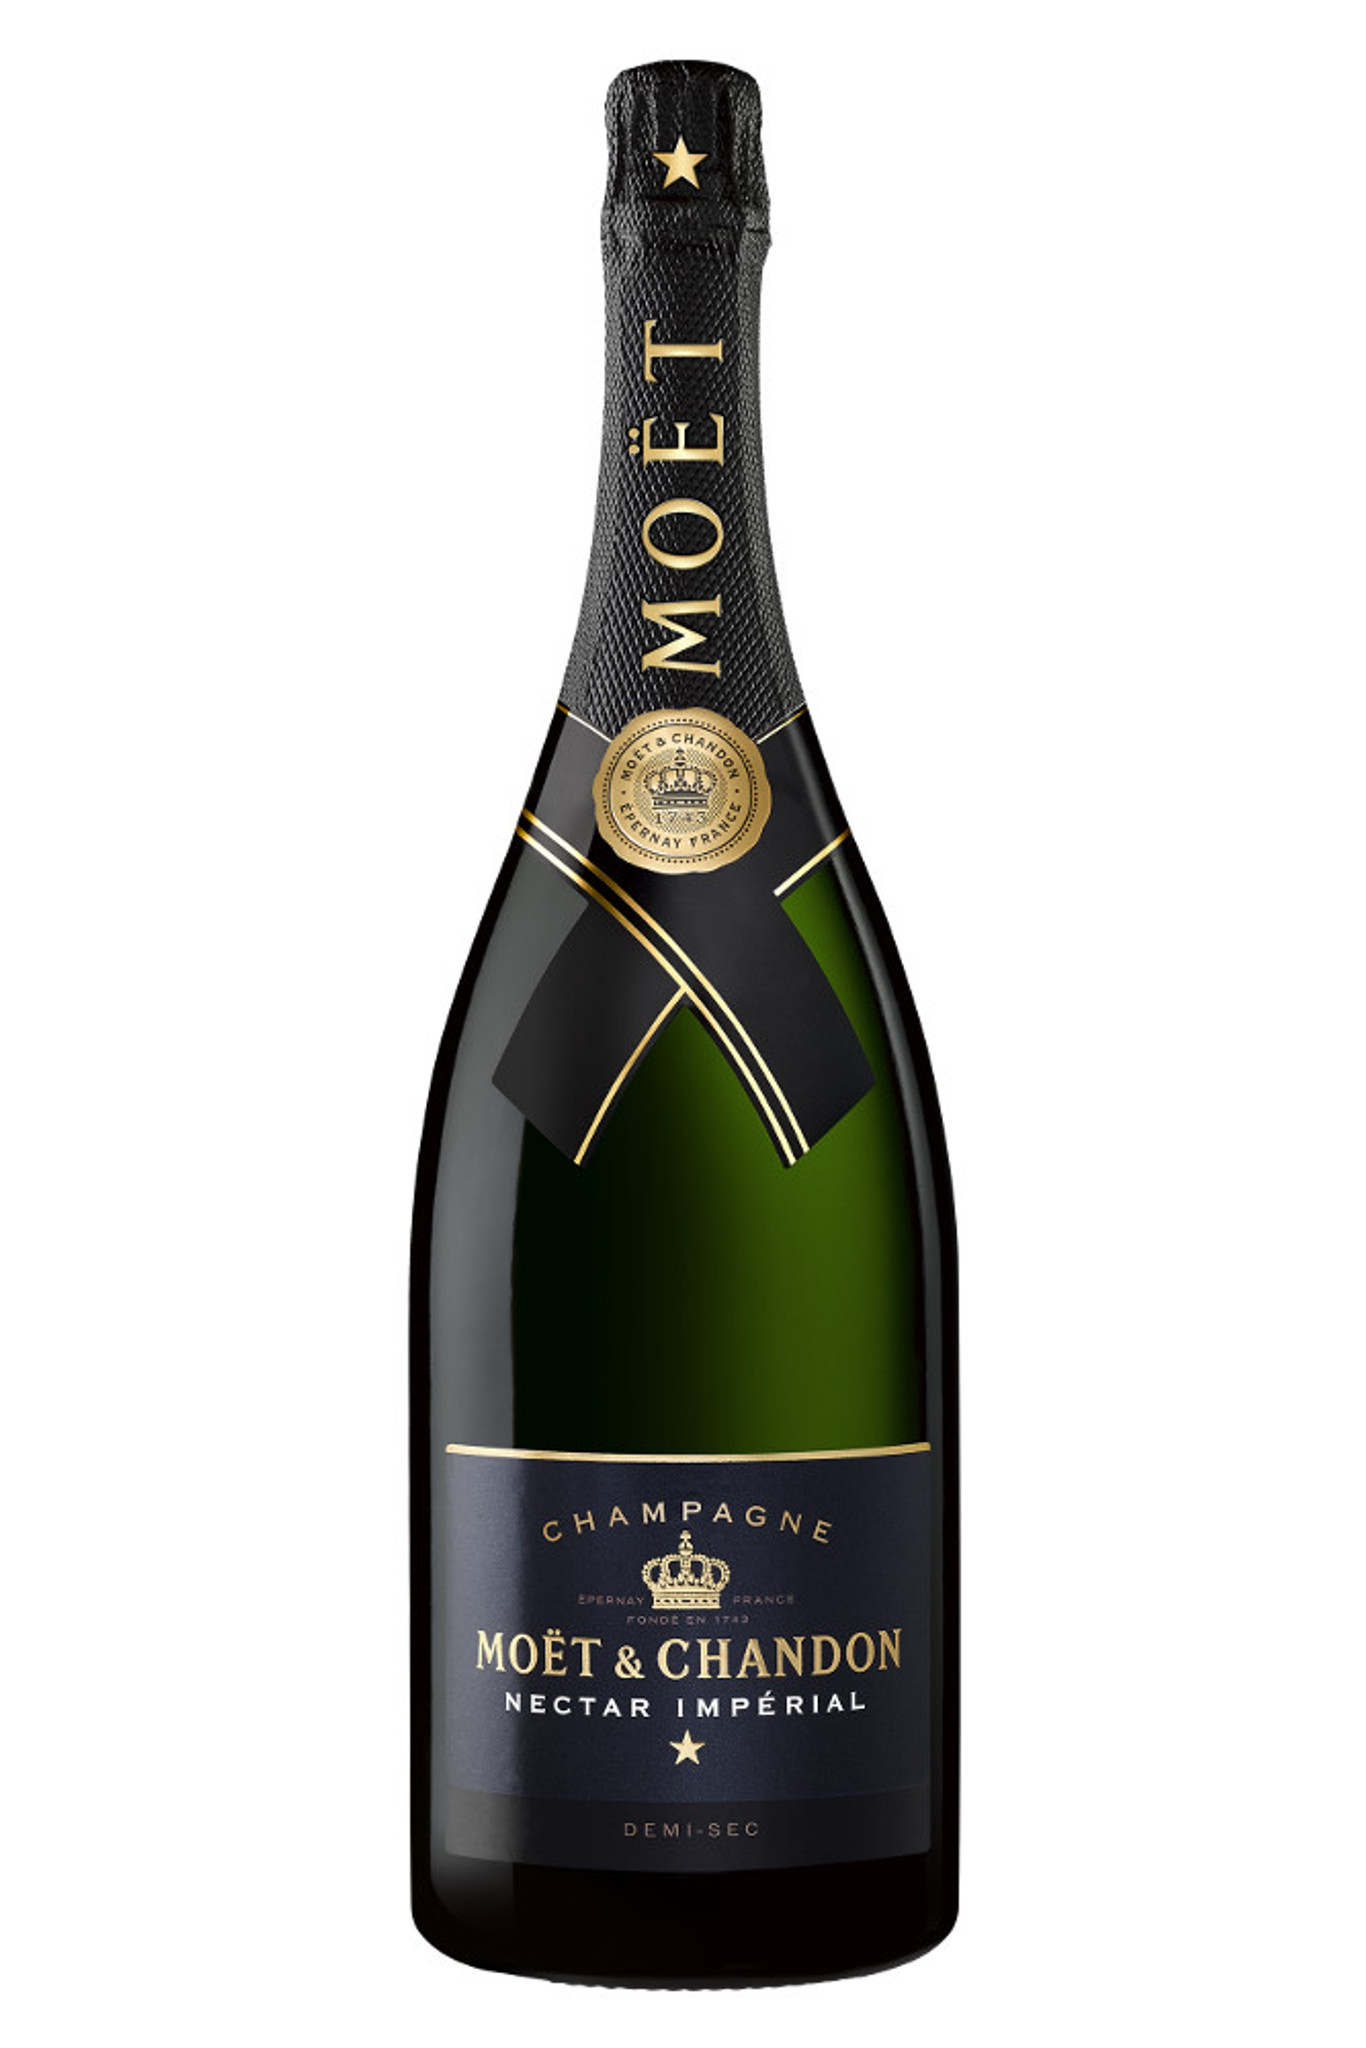 https://cdn11.bigcommerce.com/s-9hu30/images/stencil/2048x2048/products/1043/2438/moet_and_chandon_nectar_imperial_1.5l_magnum__31539.1556130419.jpg?c=2